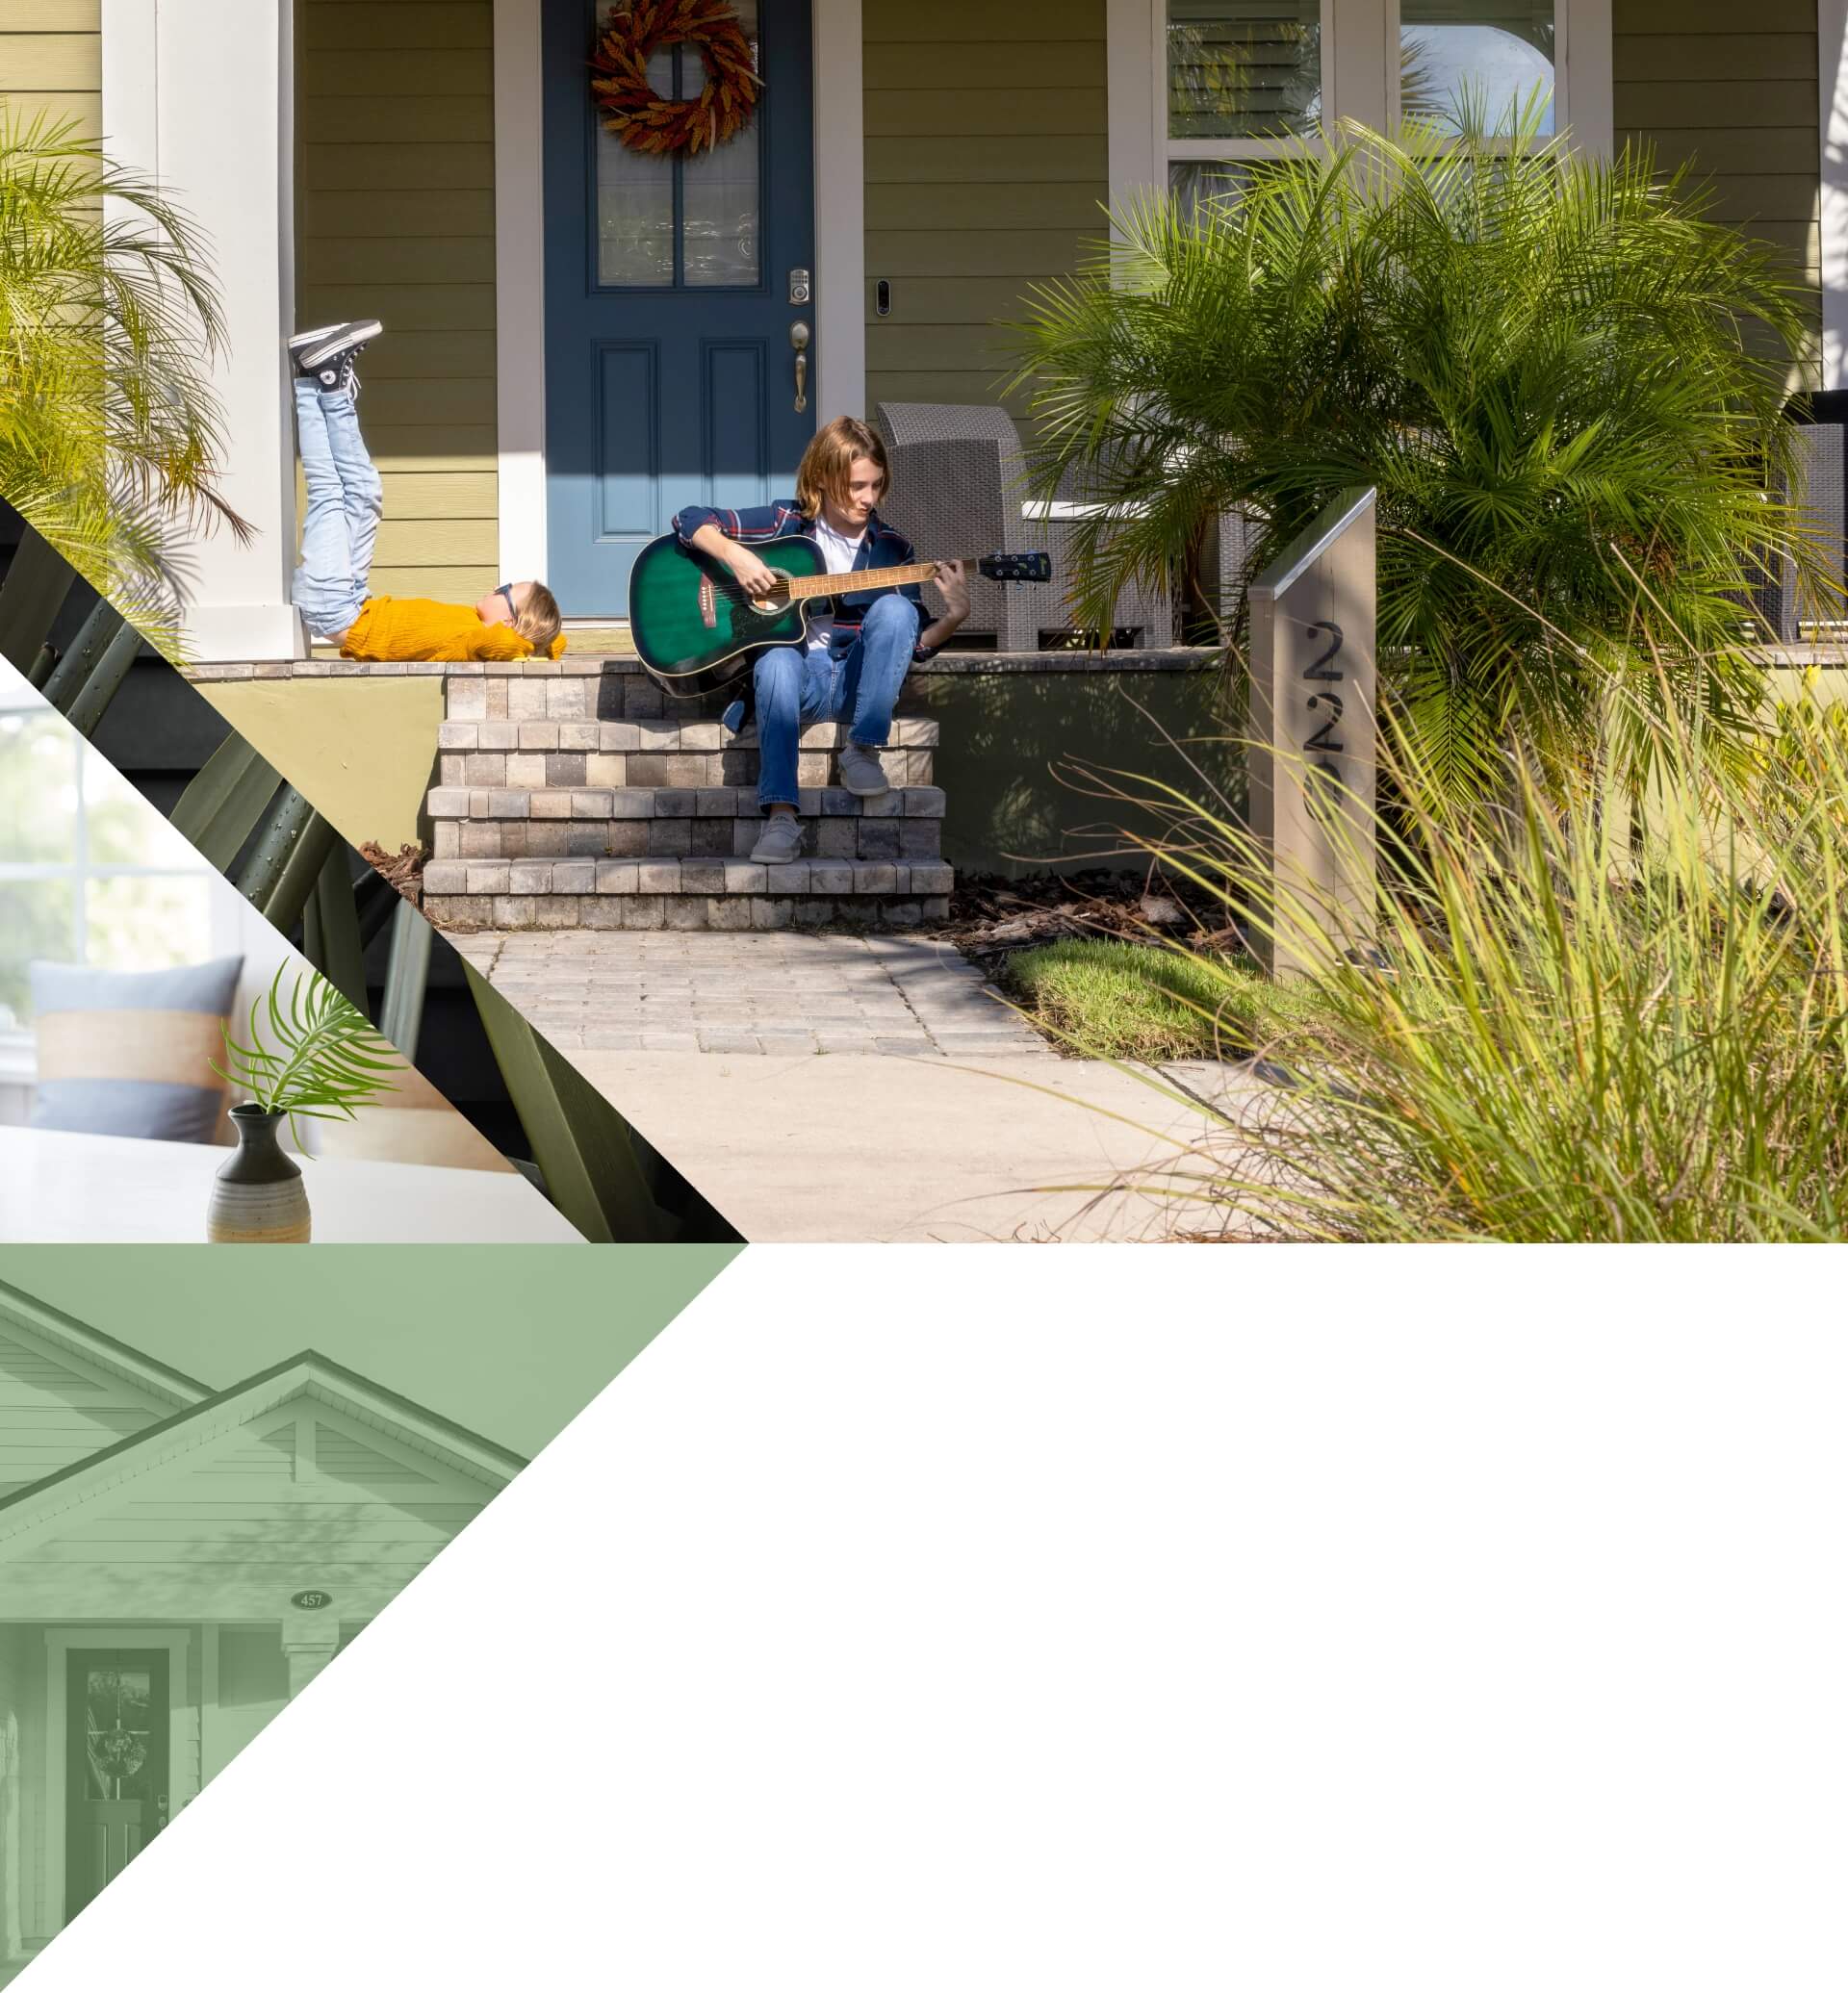 Collage of three pictures. A young brother and sister on a front porch with a blue front door surrounded by greenery. The boy is playing a green guitar on the steps and the girl laying with her legs up against a white column. Second picture is Striped vase with single green twig sitting on a table in front of a window. Third picture is Cropped exterior of a home in Wildlight.